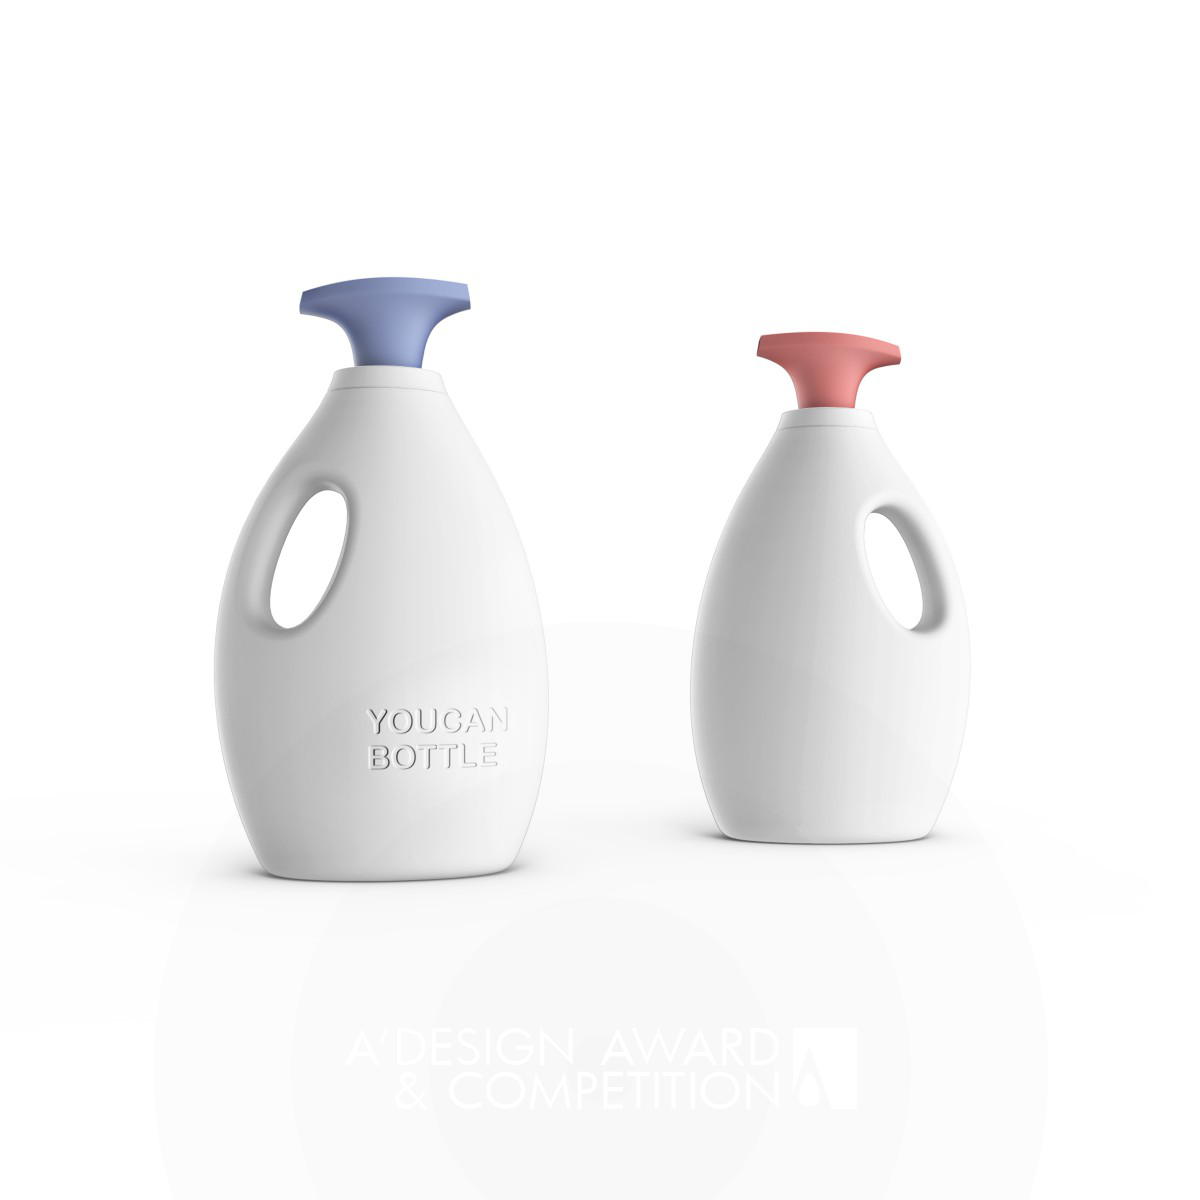 Convenience One handed bottle by Kuang Wei